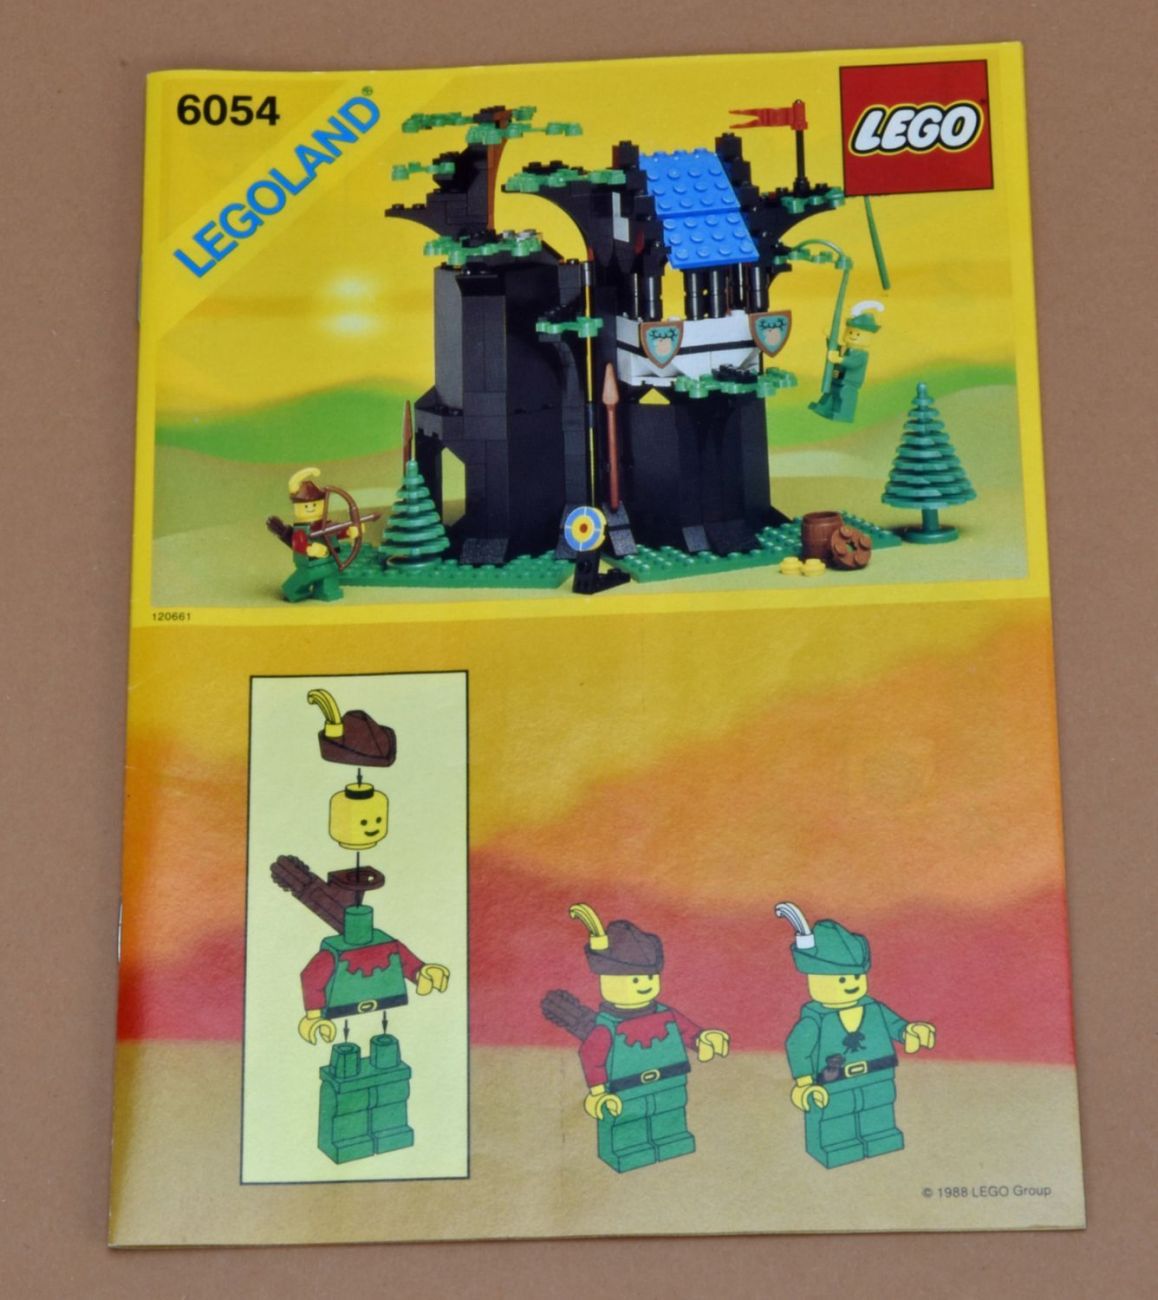 LEGO 6054 Forestmens Hideout